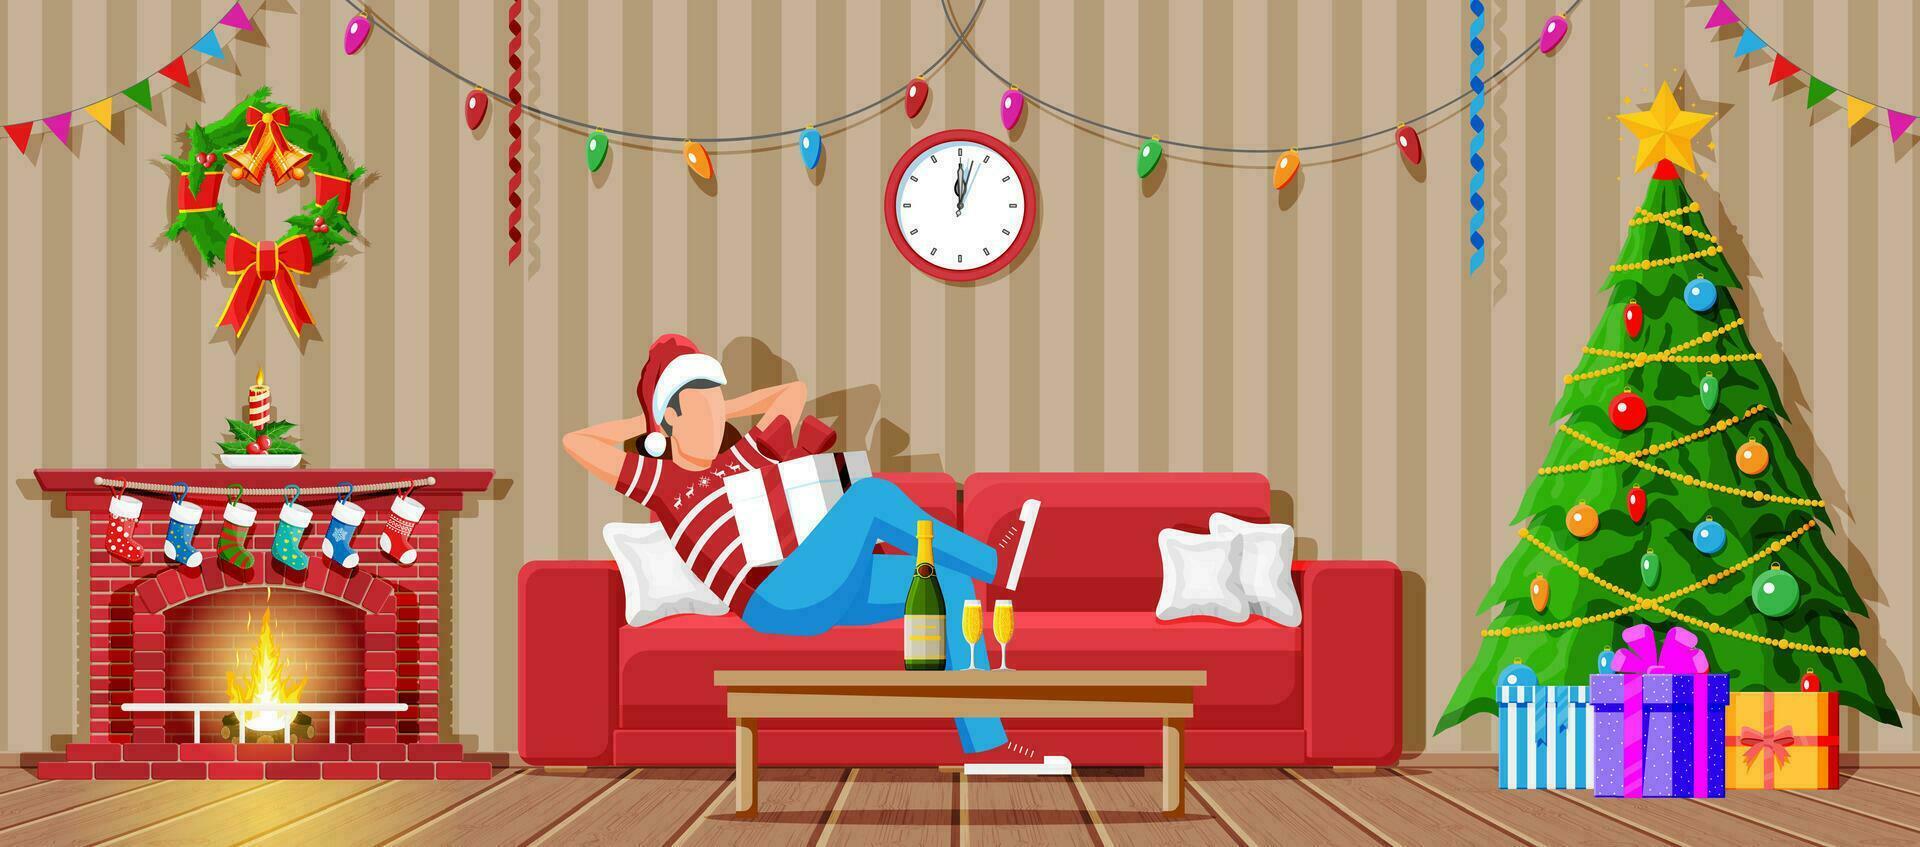 Cozy Interior of Living Room with Man on Sofa, Table, Fireplace, Christmas Tree. Happy New Year Decoration. Merry Christmas Holiday. New Year and Xmas Celebration. Cartoon Flat Vector Illustration